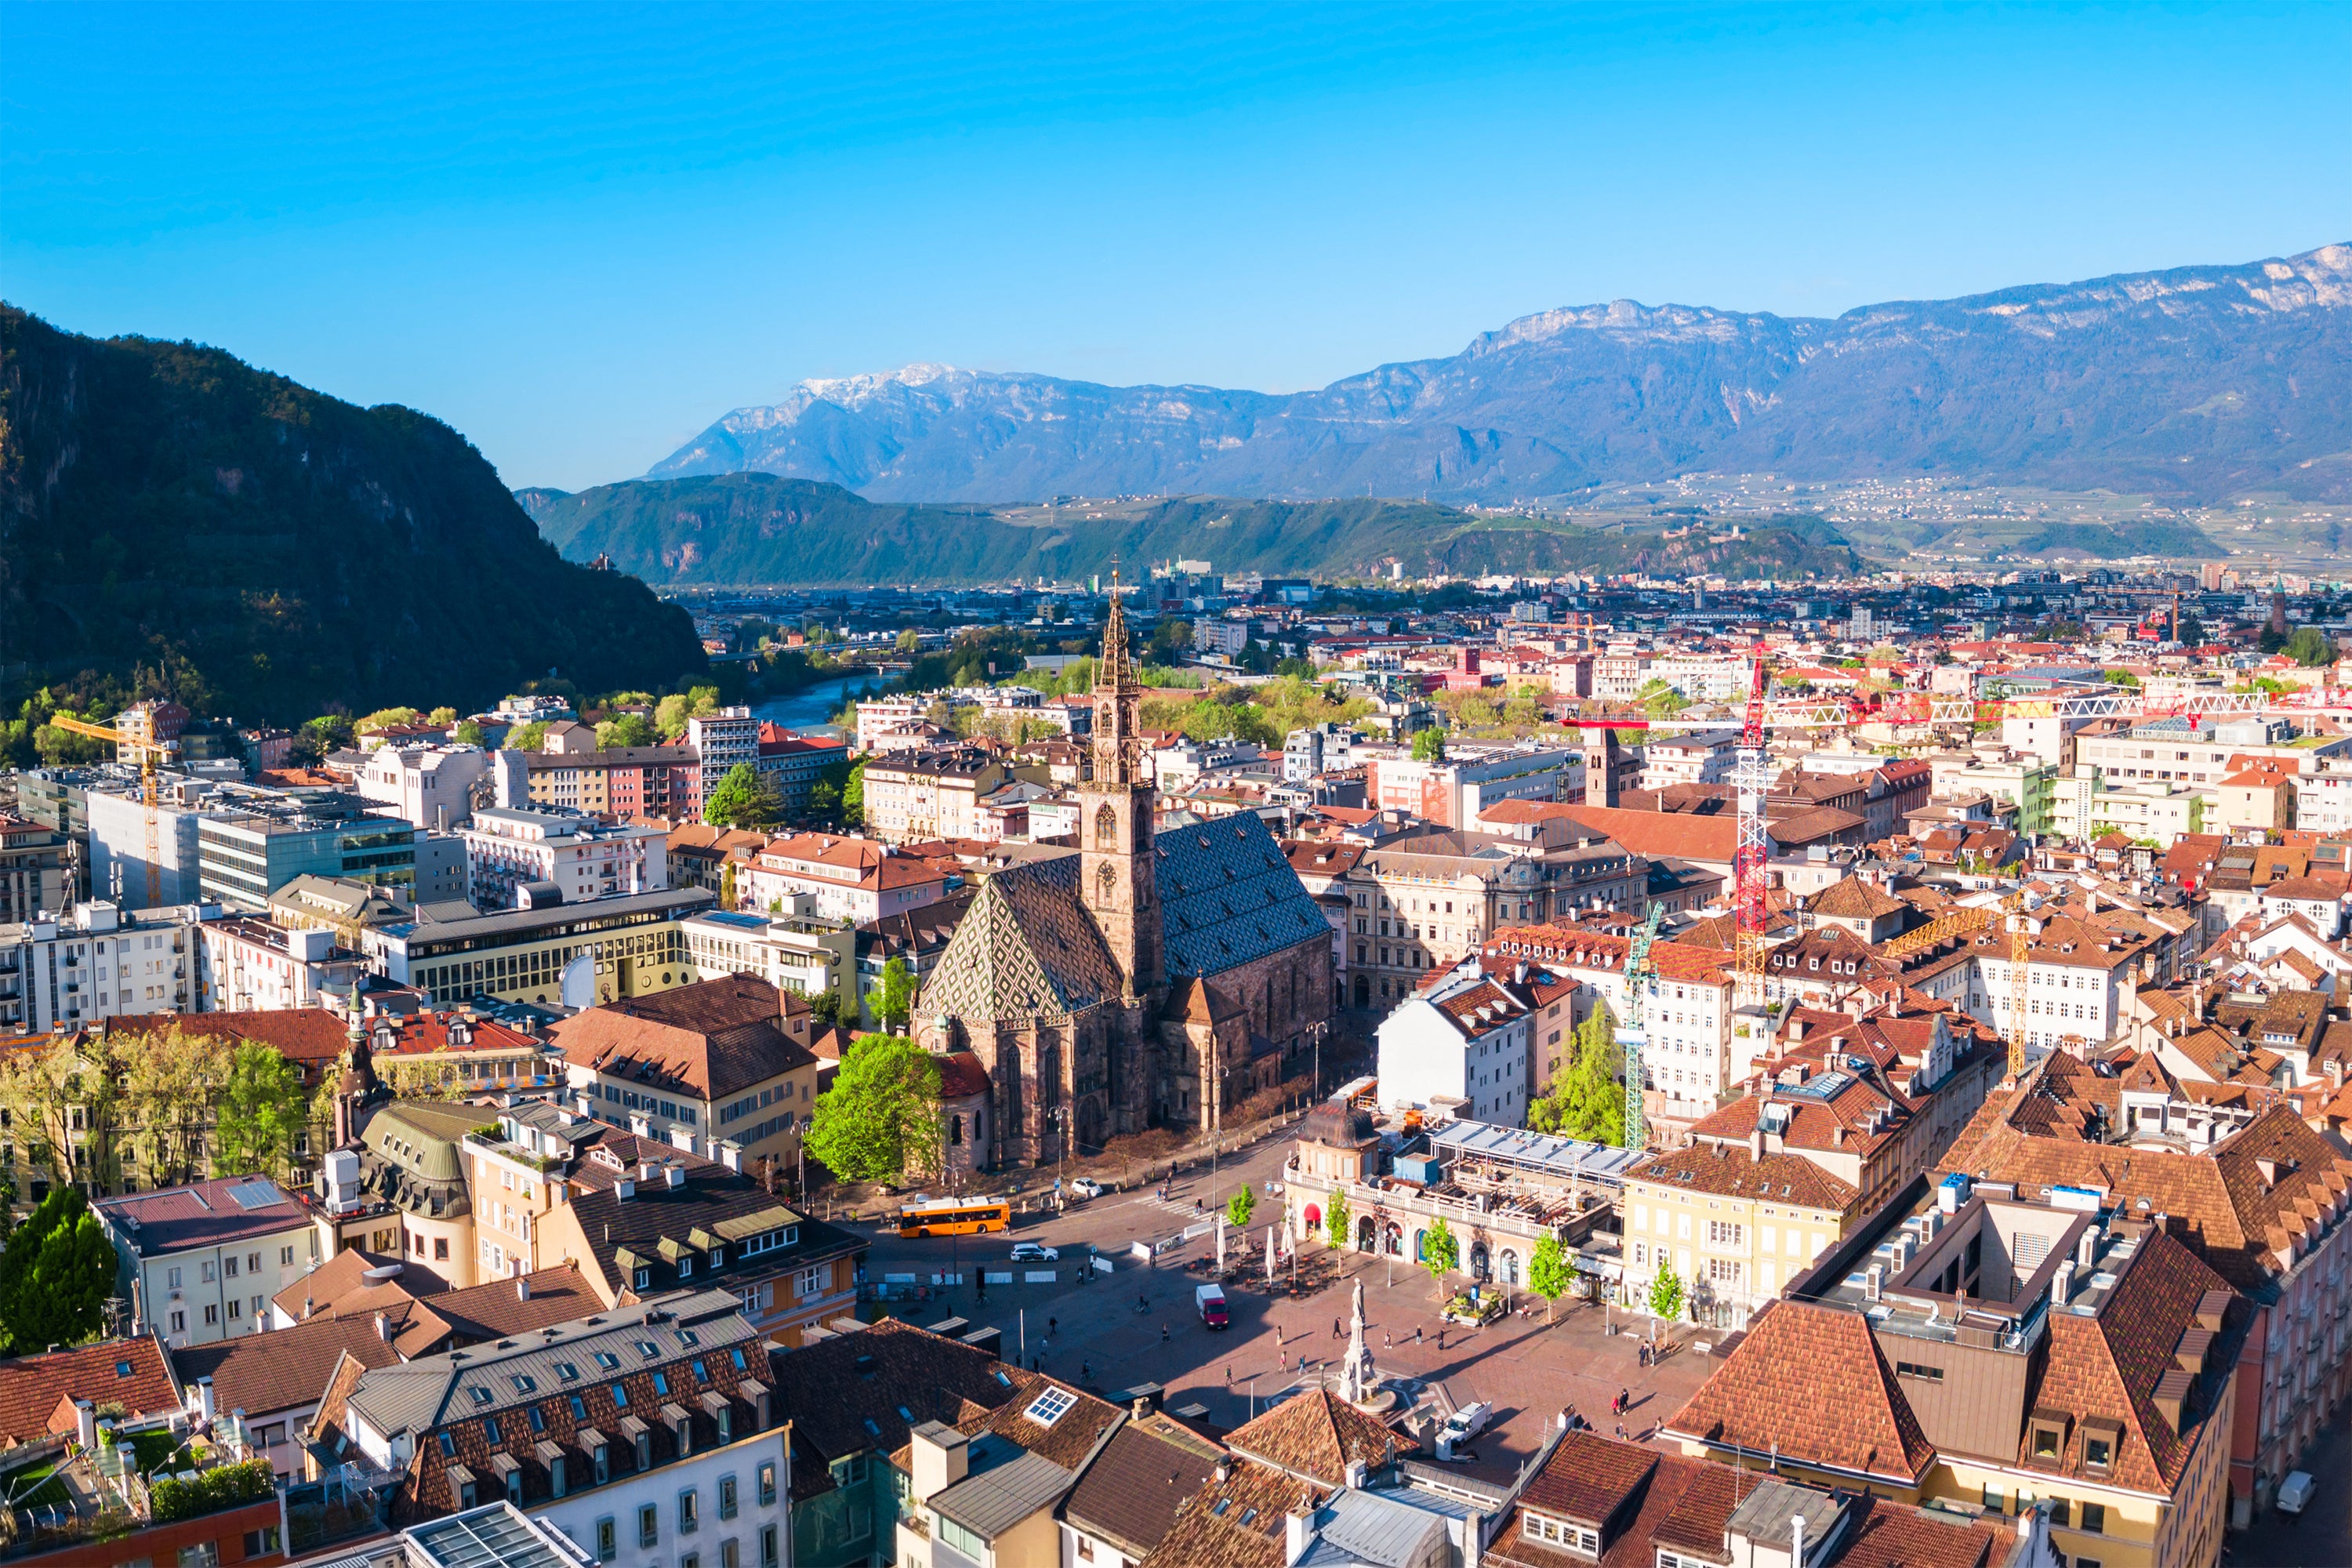 The region includes Bolzano, which is the South Tyrol province’s capital city